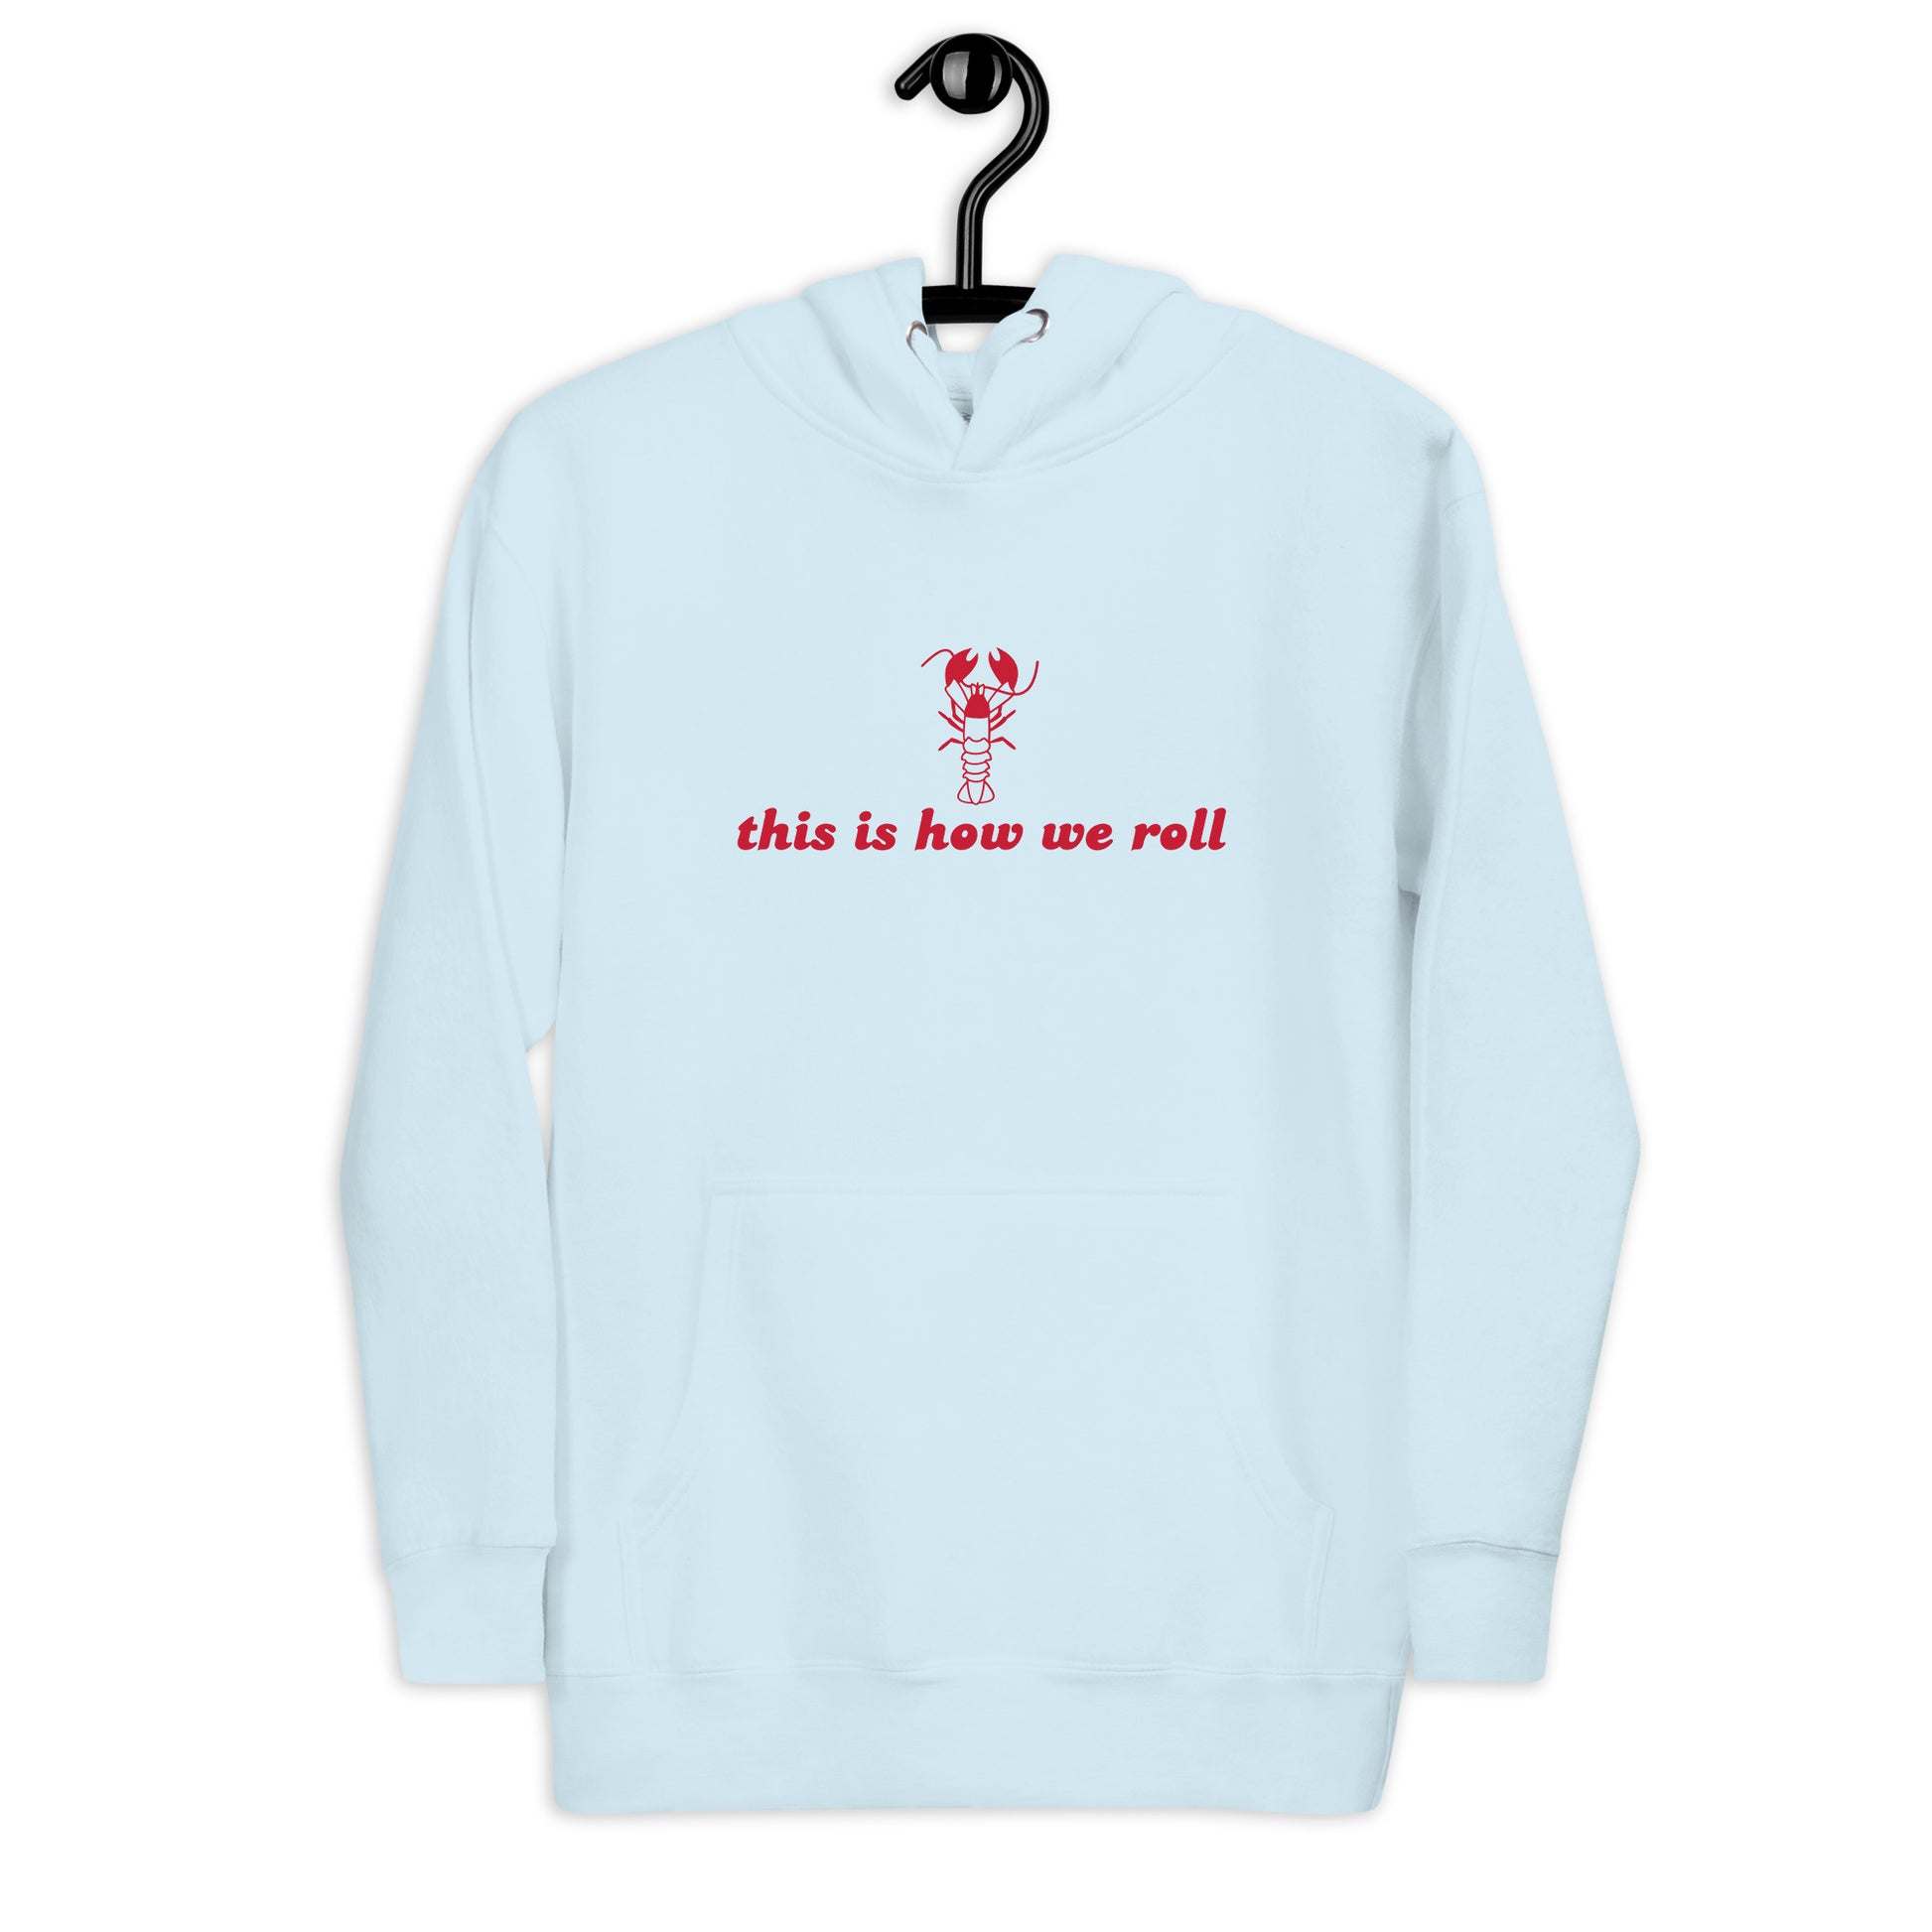 sky blue hoodie that says "this is how we roll" in red lettering with red lobster graphic